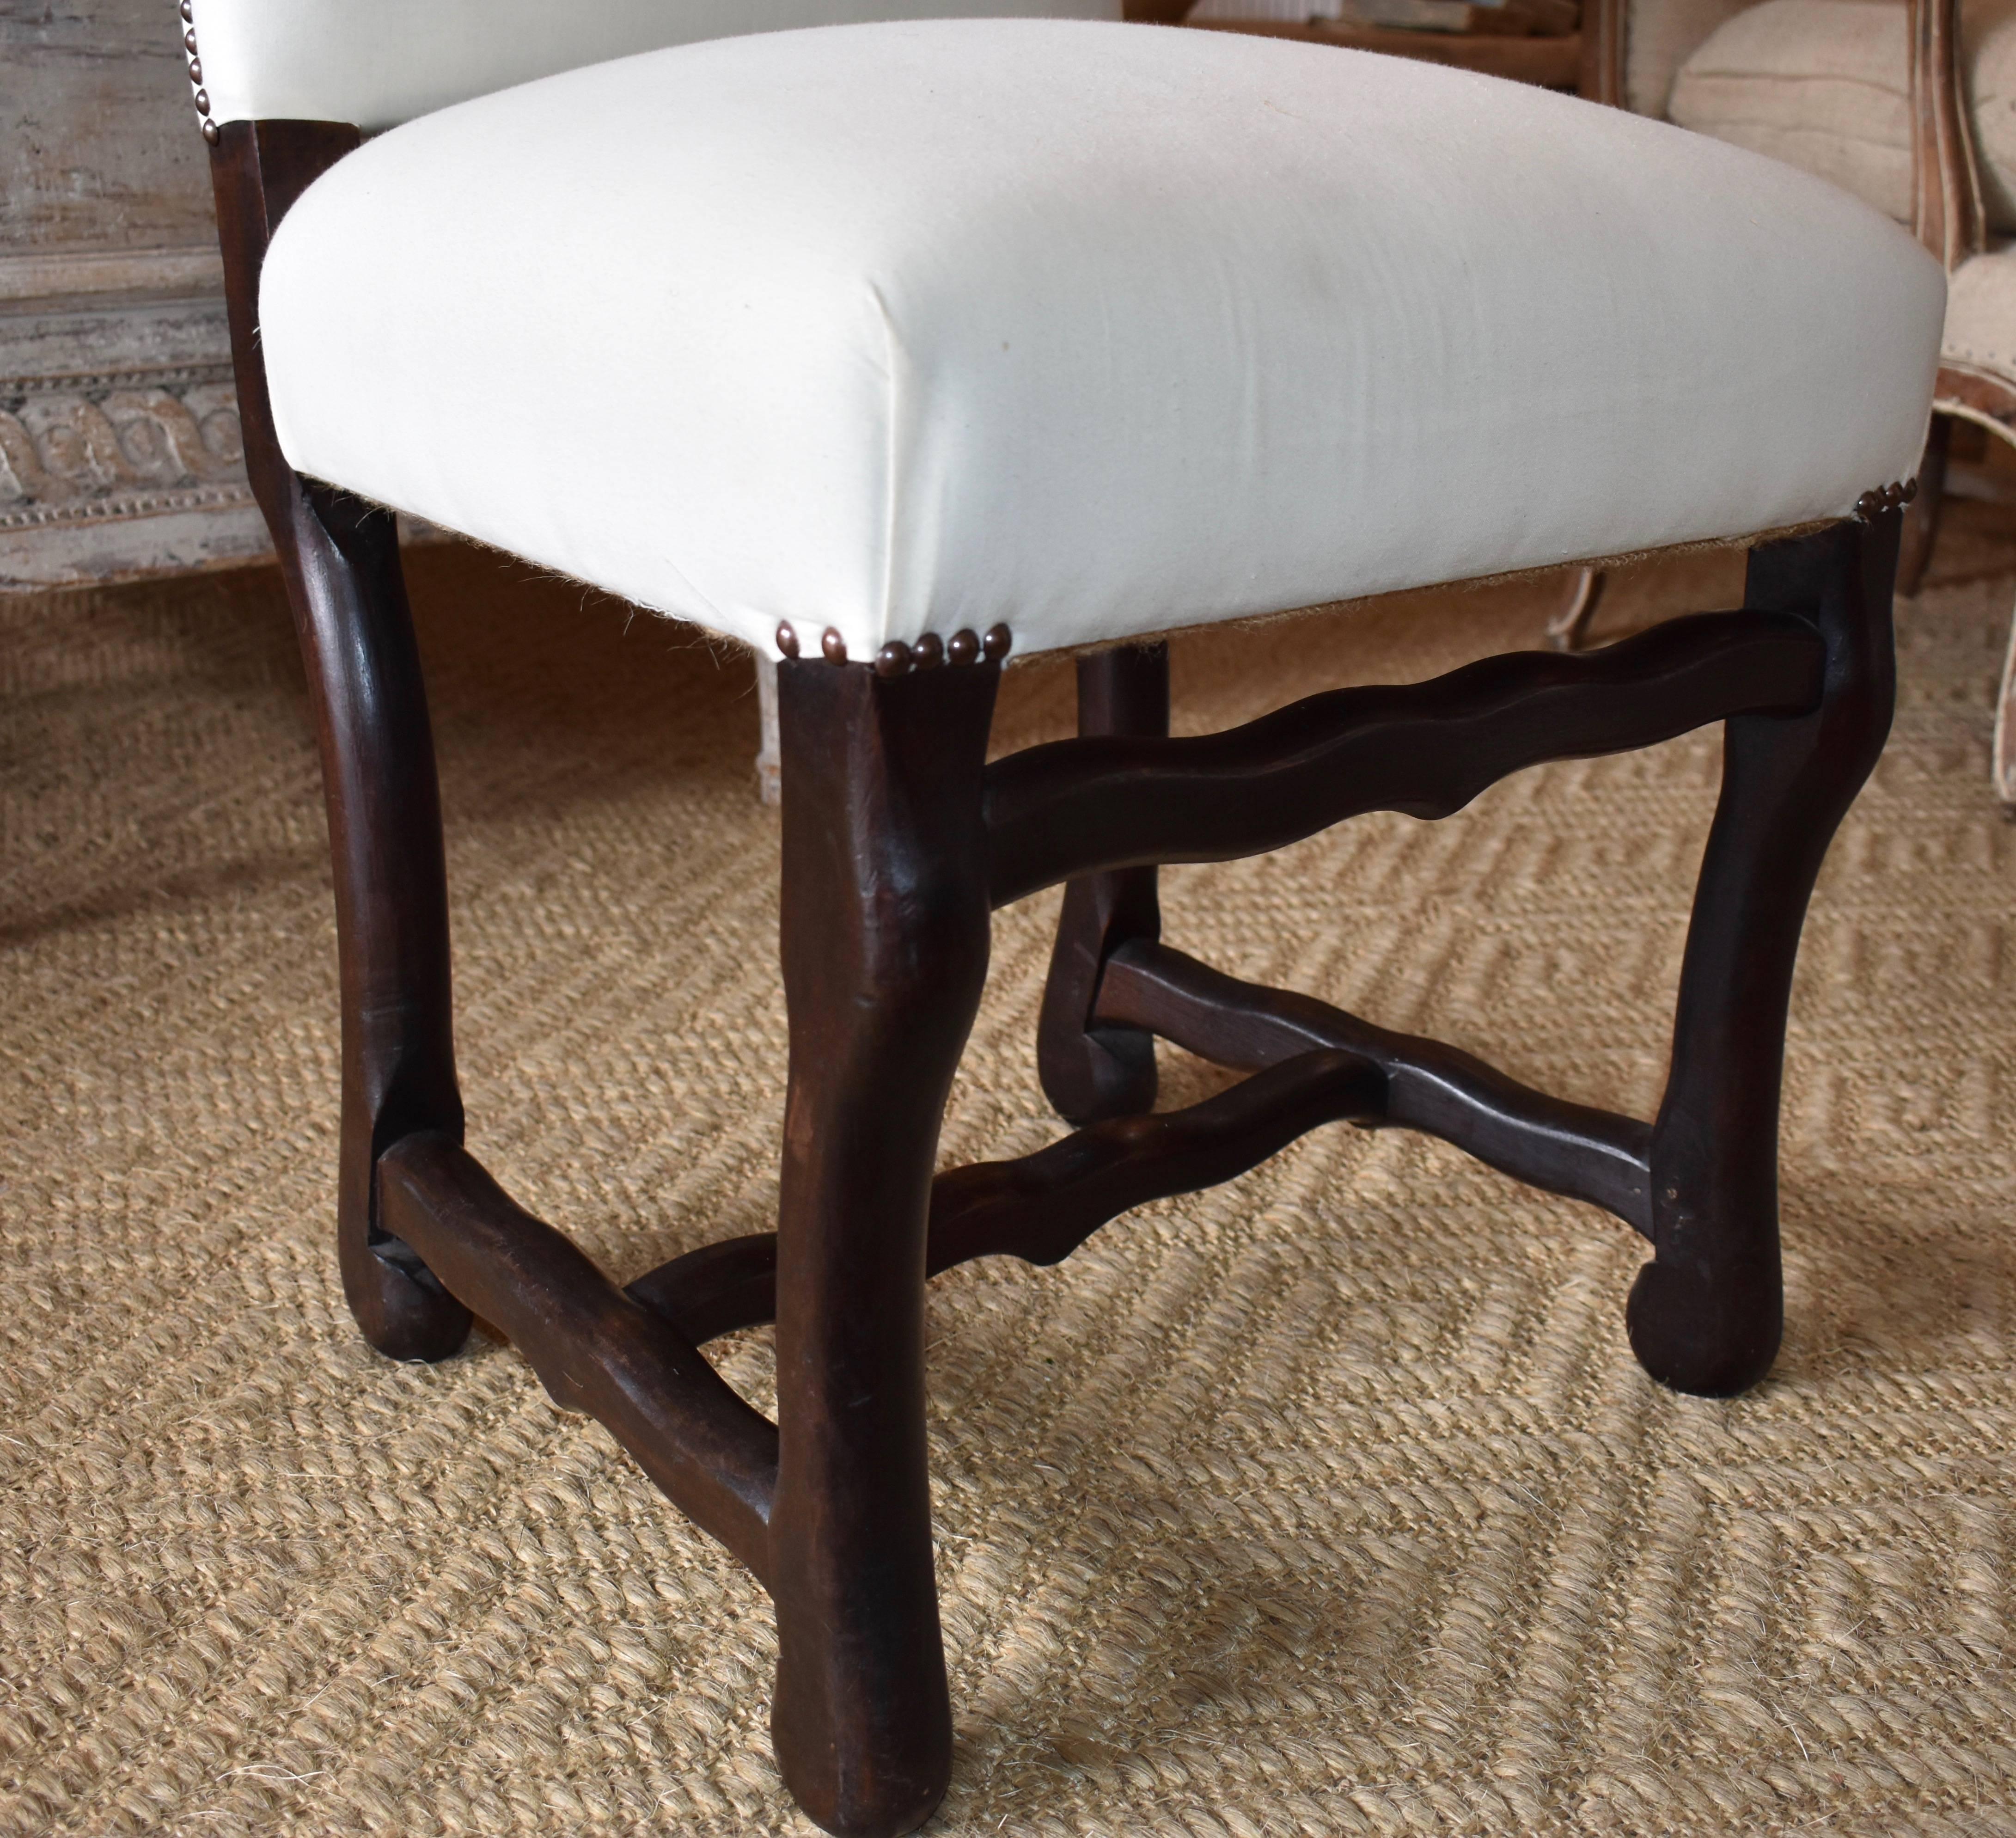 Very nice set of ten Os de Mouton dining chairs from Normandy, France. Sturdy and very comfortable.